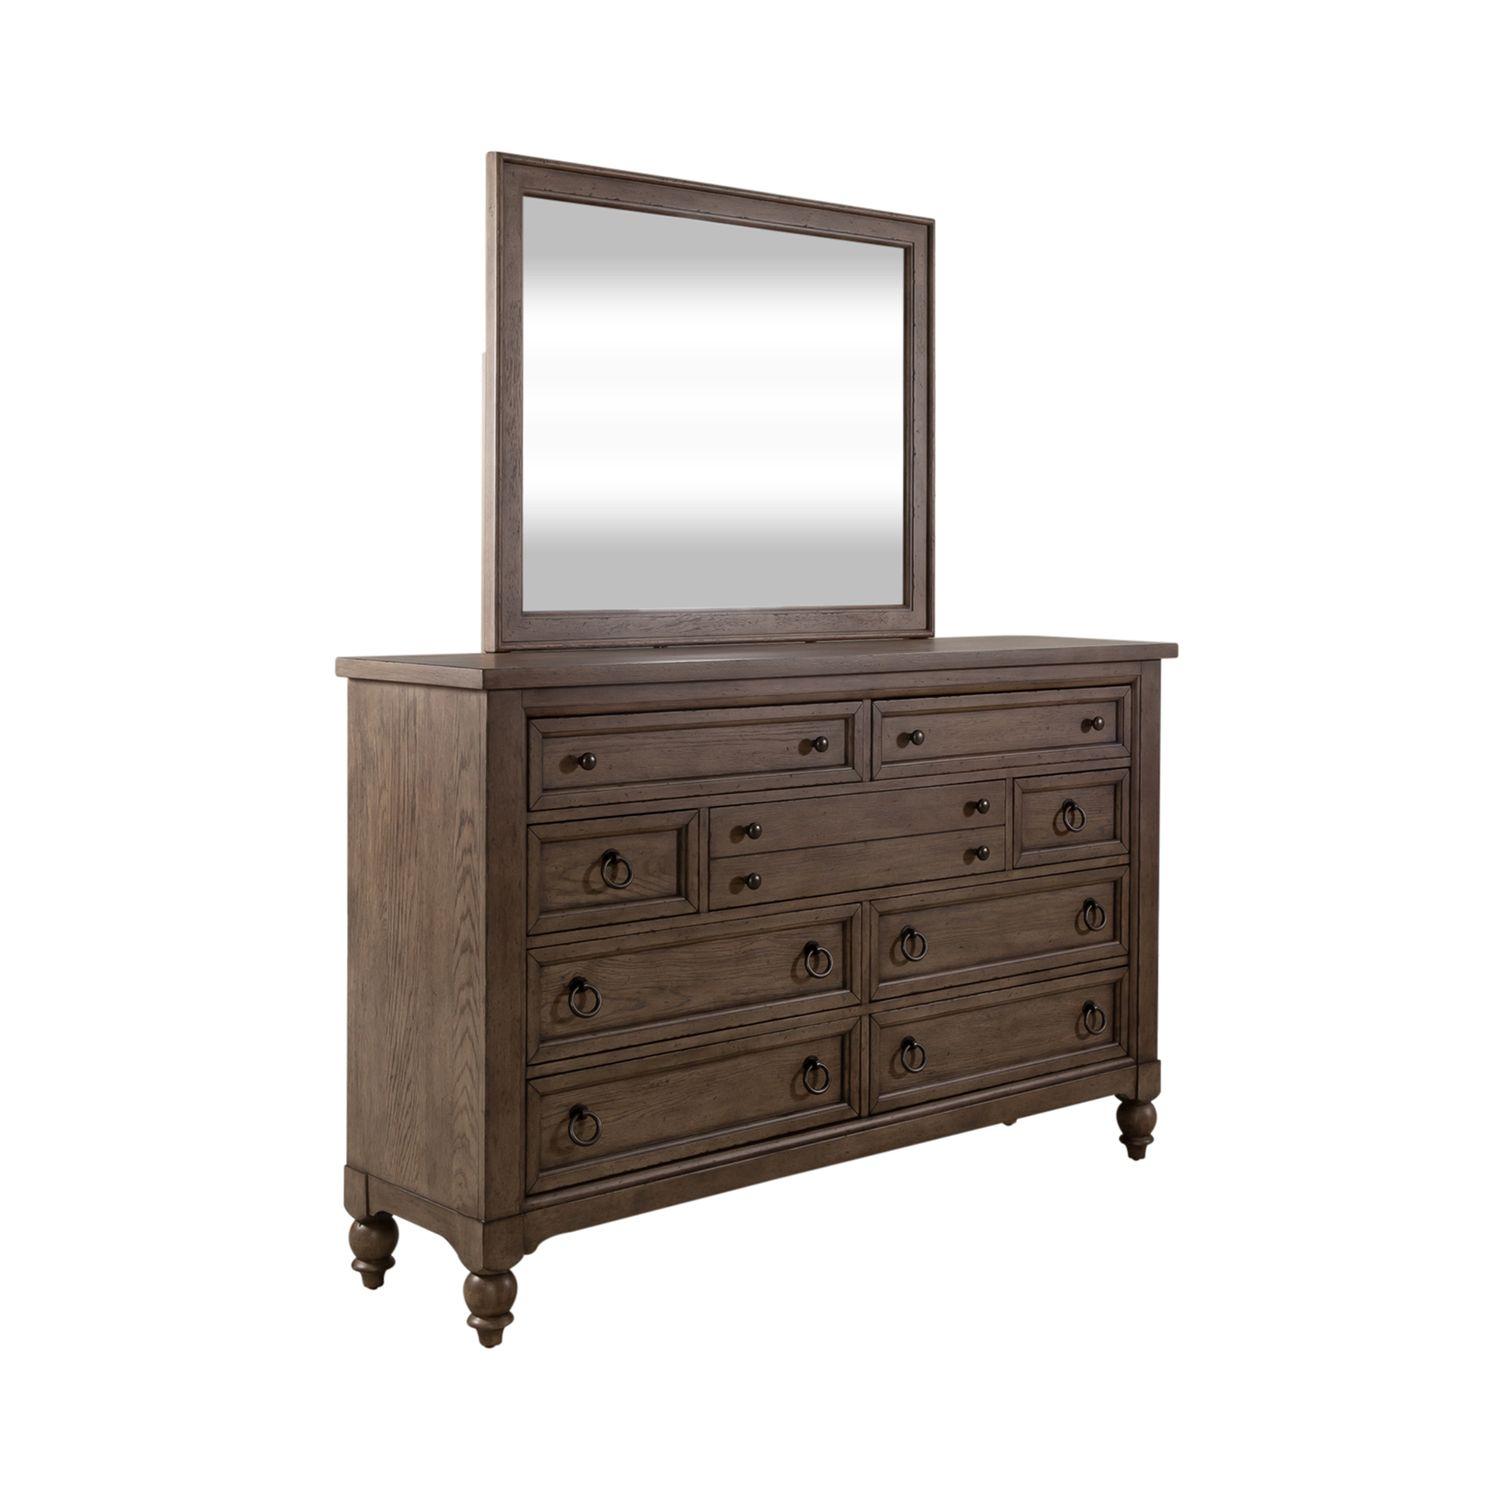 Transitional Dresser With Mirror Americana Farmhouse (615-BR) 615-BR-DM in Taupe 